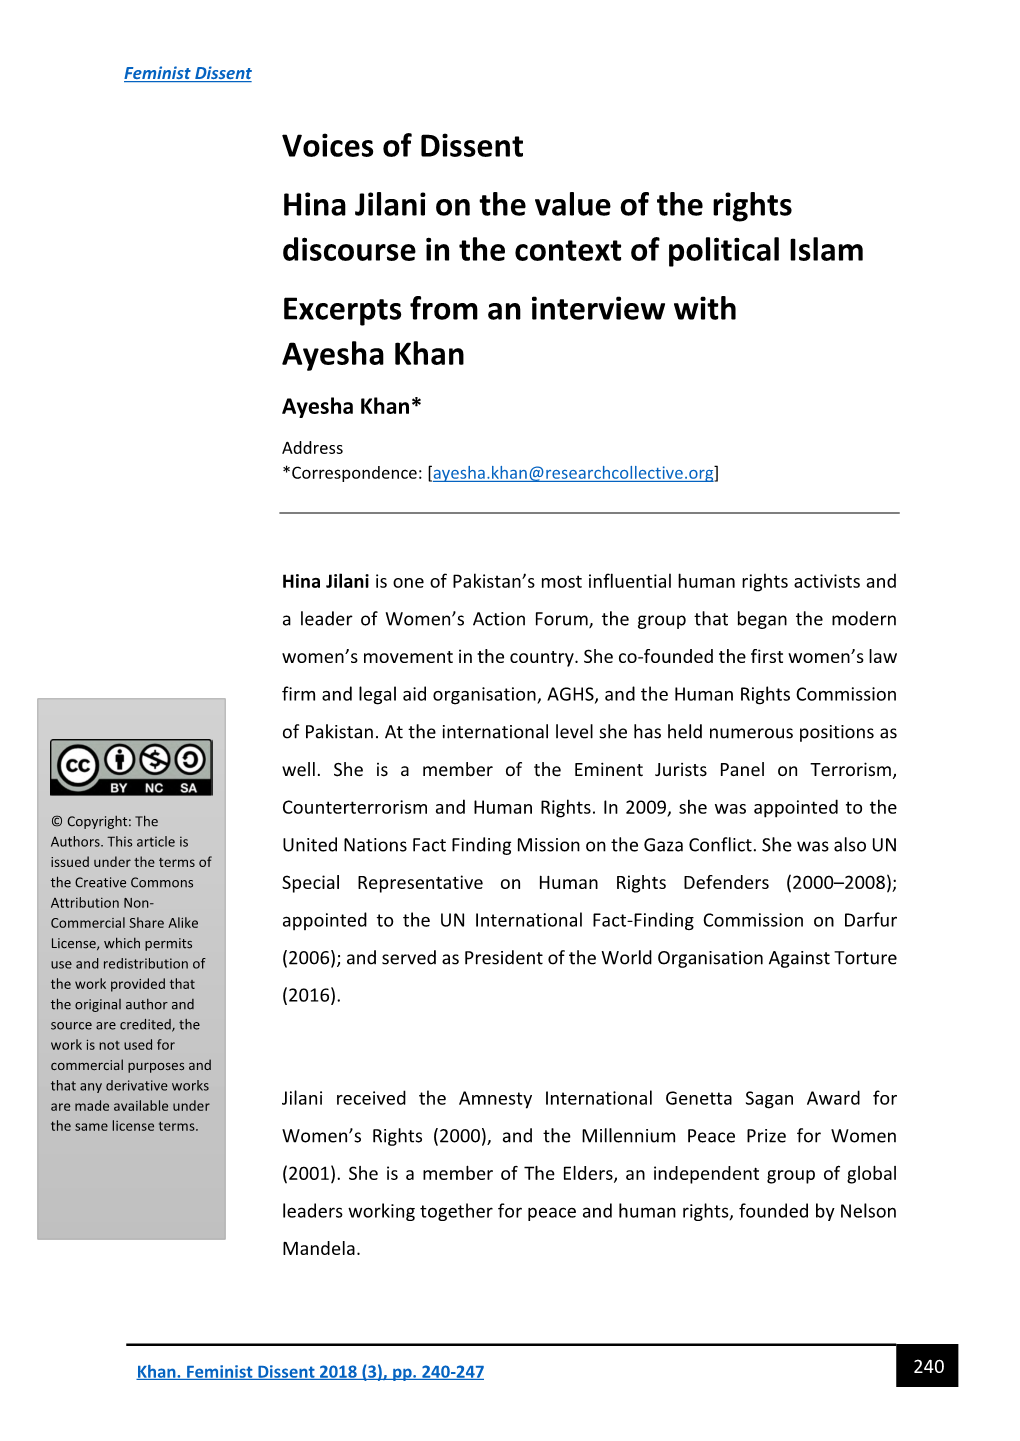 Voices of Dissent Hina Jilani on the Value of the Rights Discourse in the Context of Political Islam Excerpts from an Interview with Ayesha Khan Ayesha Khan*